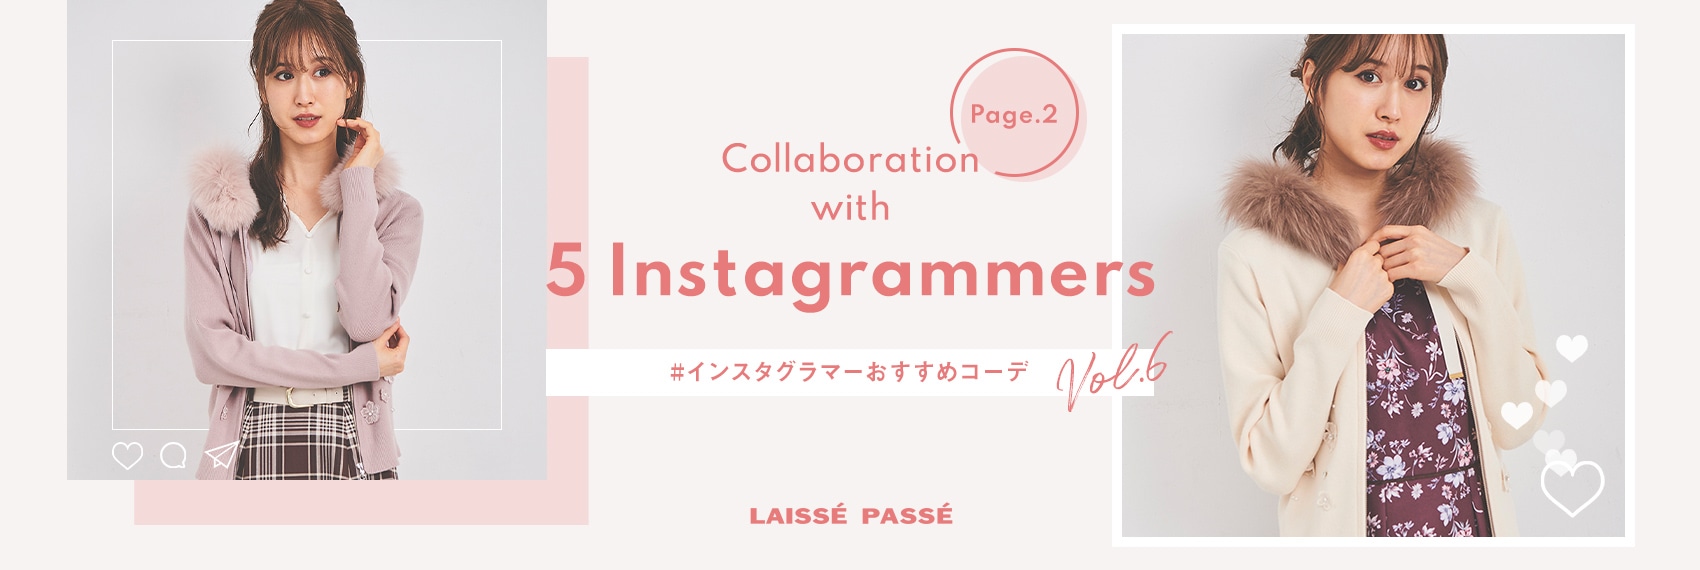 2021 Autumn Collaboration with 5 Instagrammers Vol.6 page.2